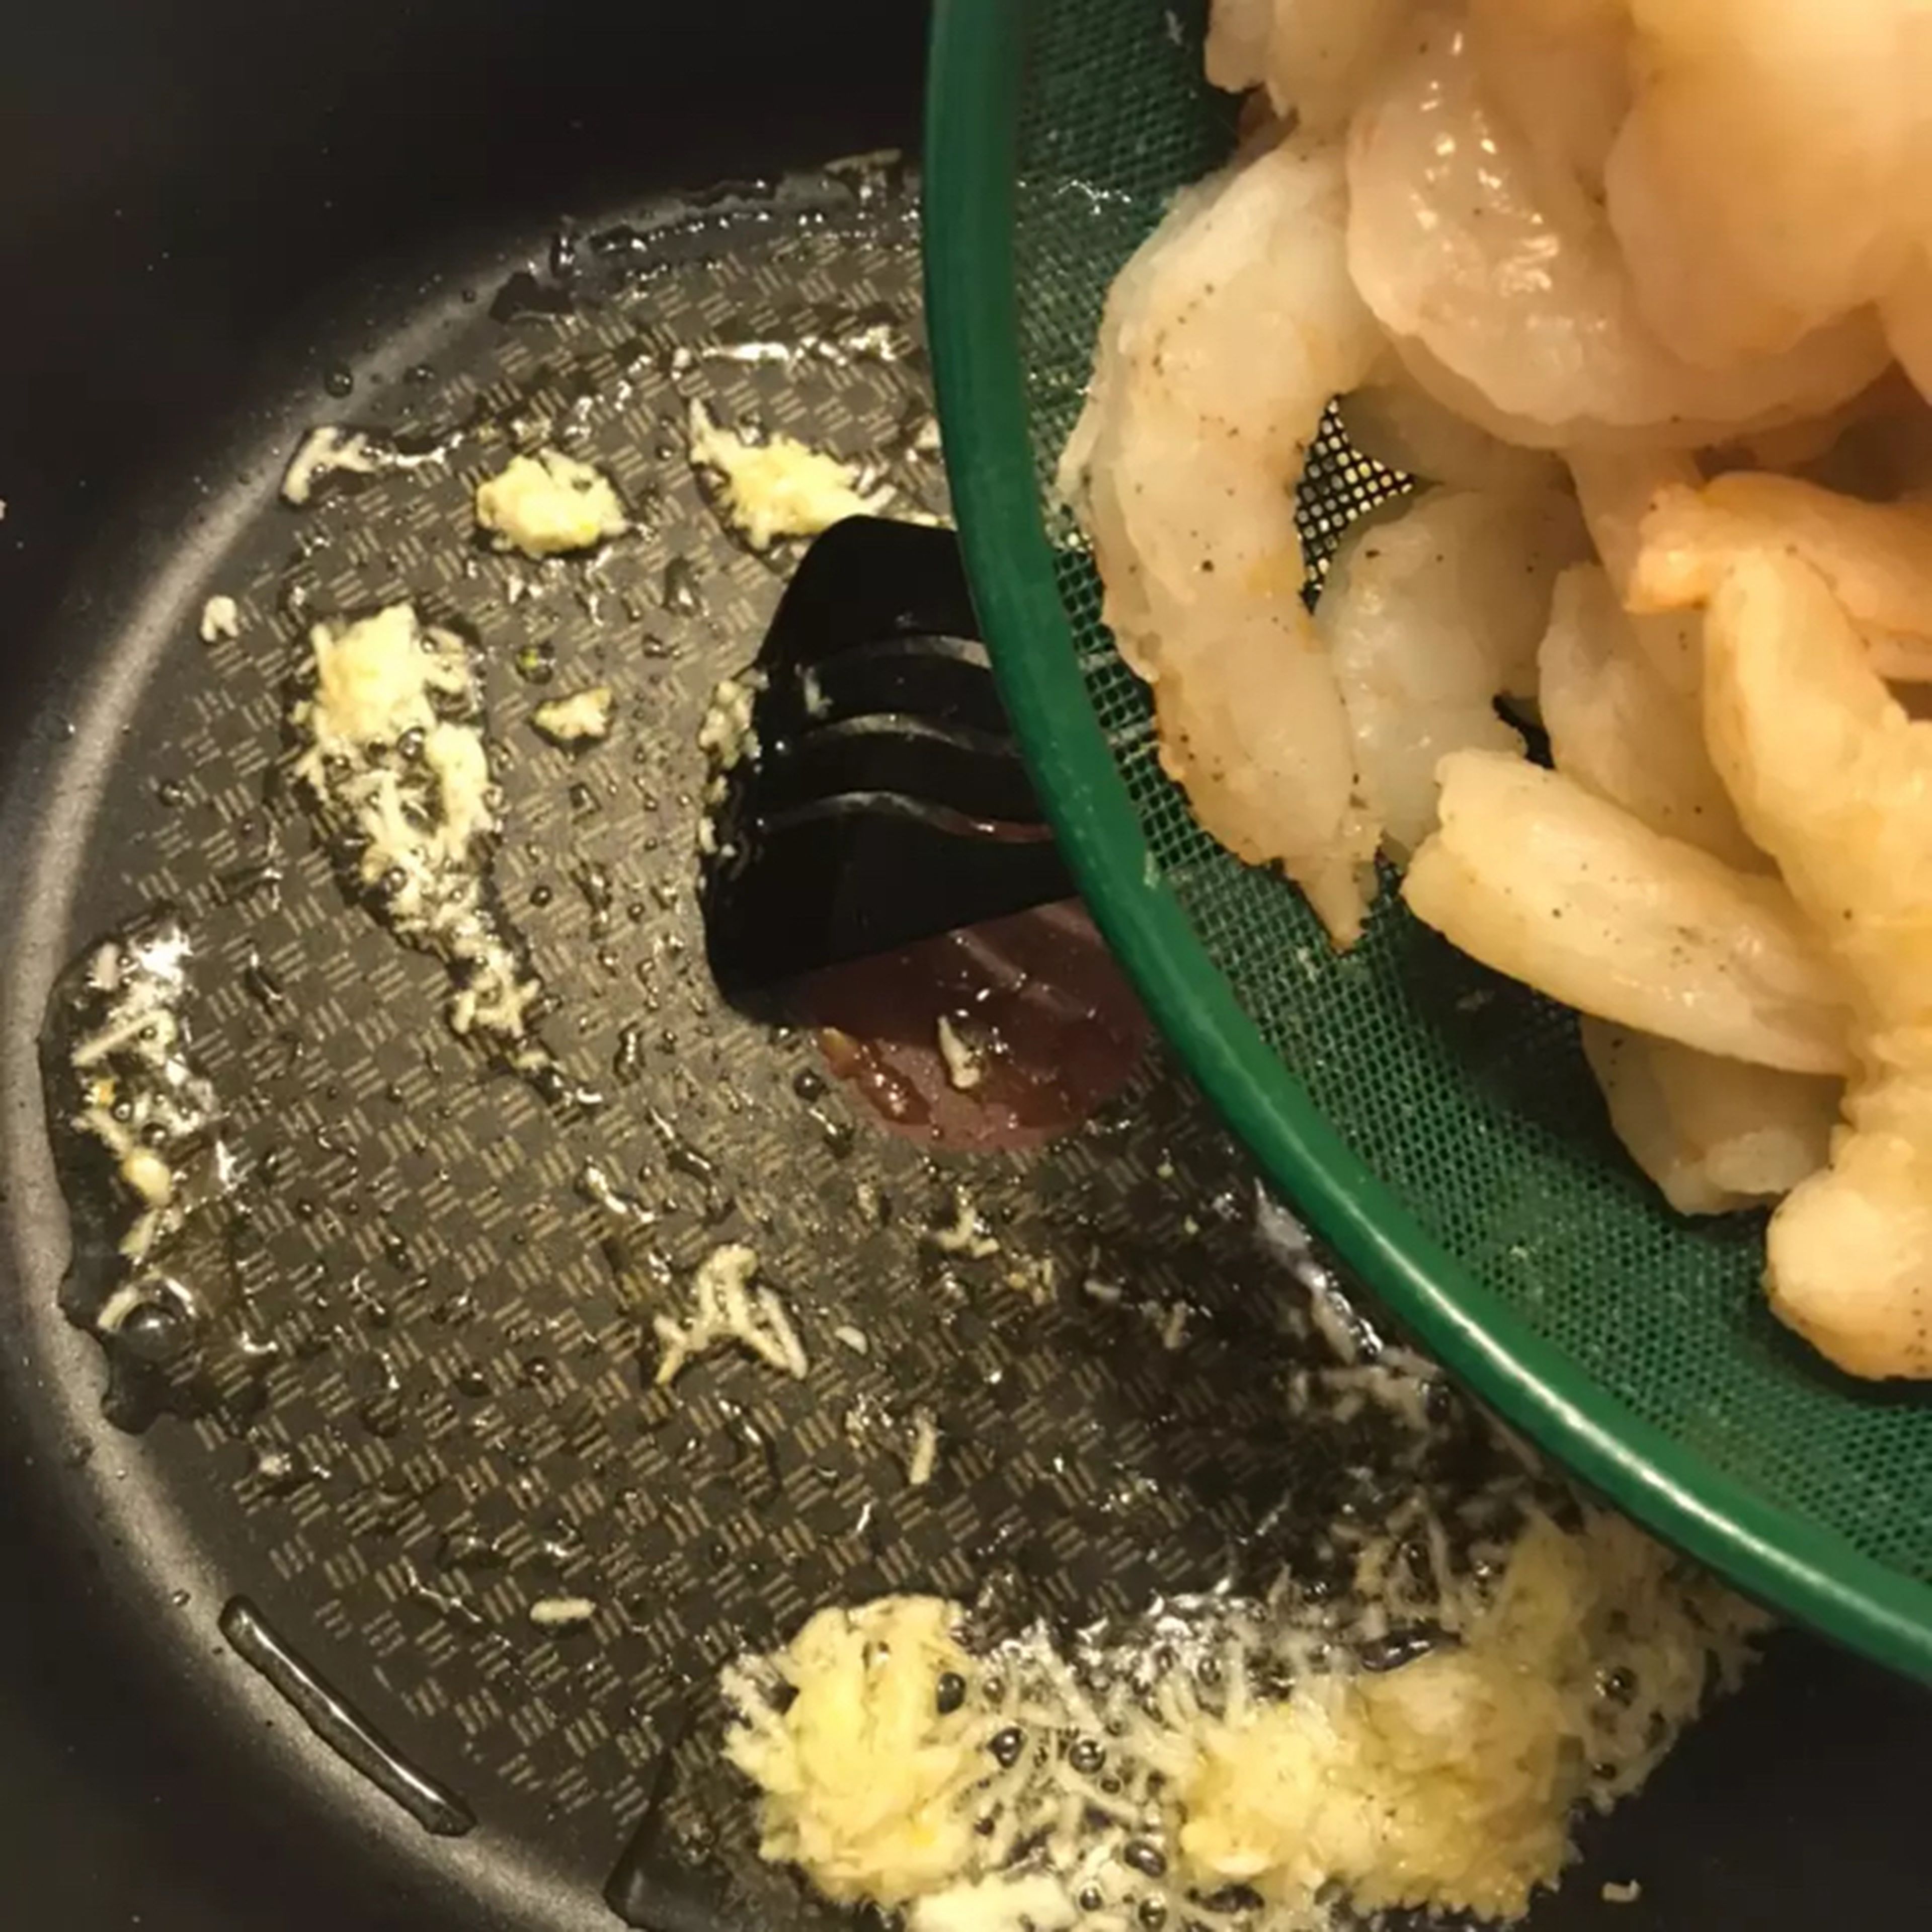 Heat the oil in a deep pan and pour the grated garlic. Add the shrimp and fry for 4-5 minutes until it turns pink. Then take out the shrimp and put it aside.